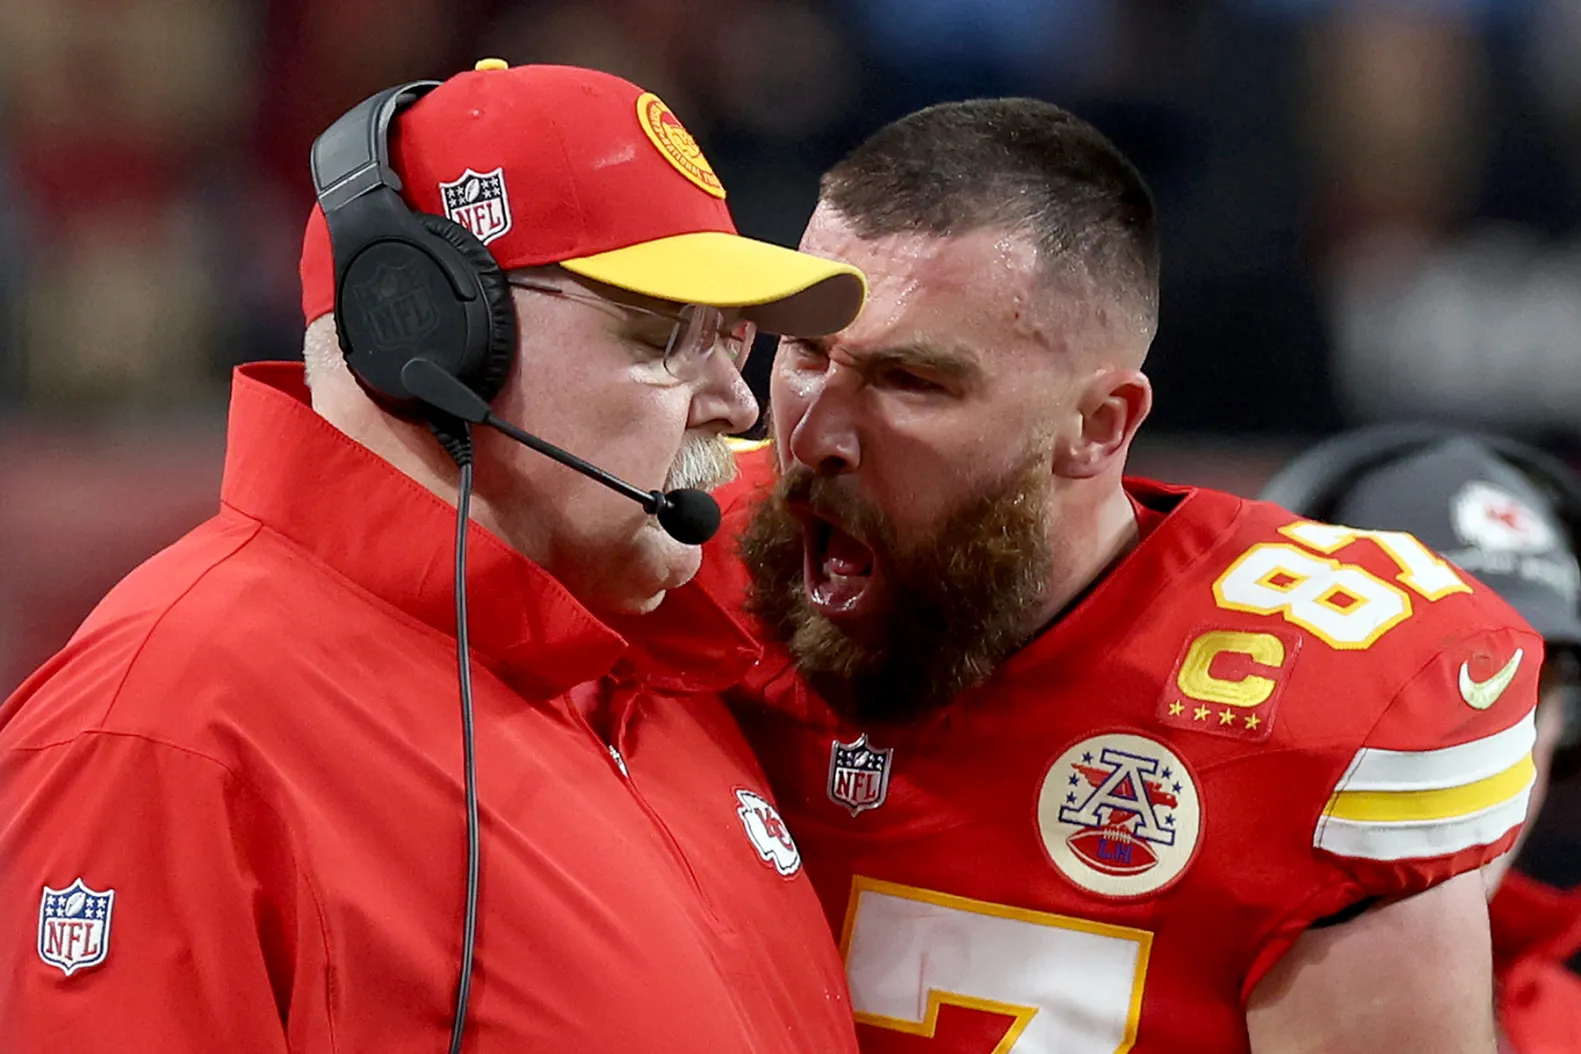 Super Bowl Drama Unfolded Inside Look at Travis Kelce's Heated Moment with Coach Andy Reid-